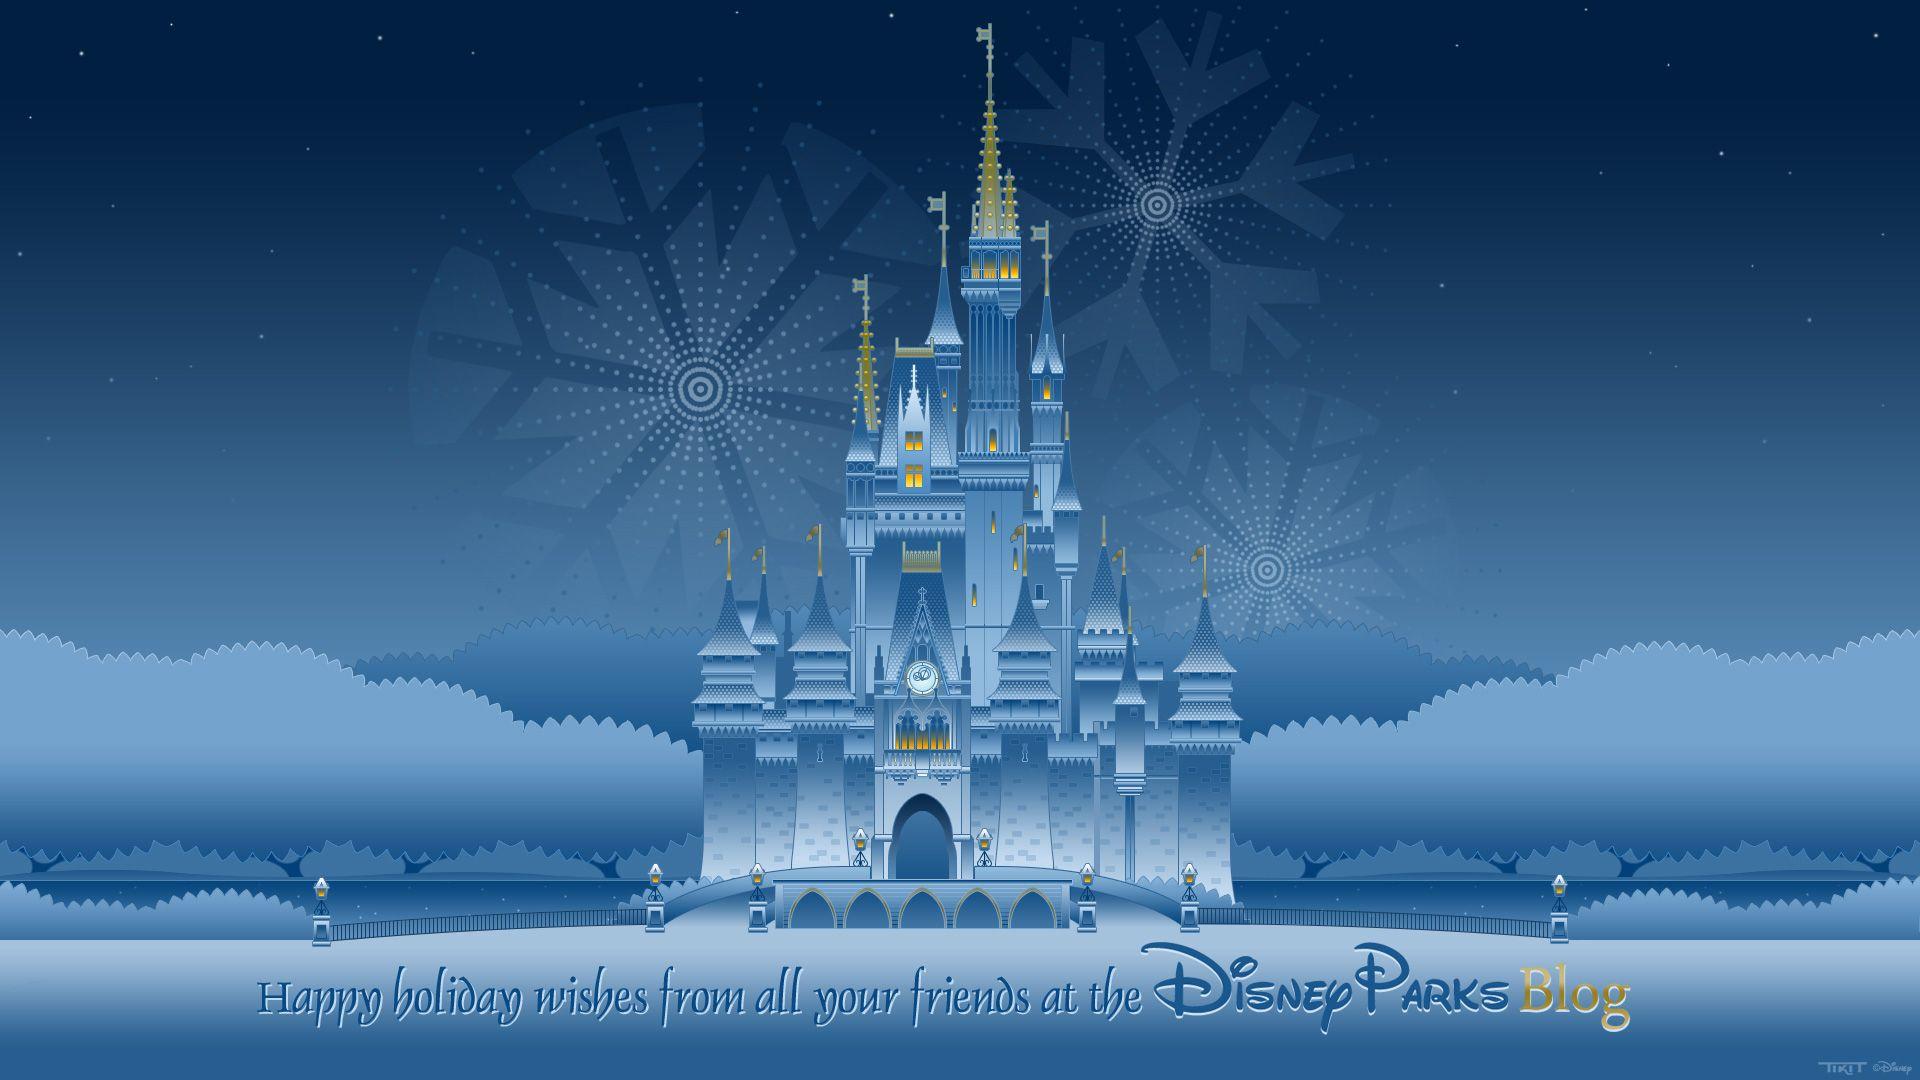 Celebrate The Holidays With 15 Disney Parks Blog Wallpaper